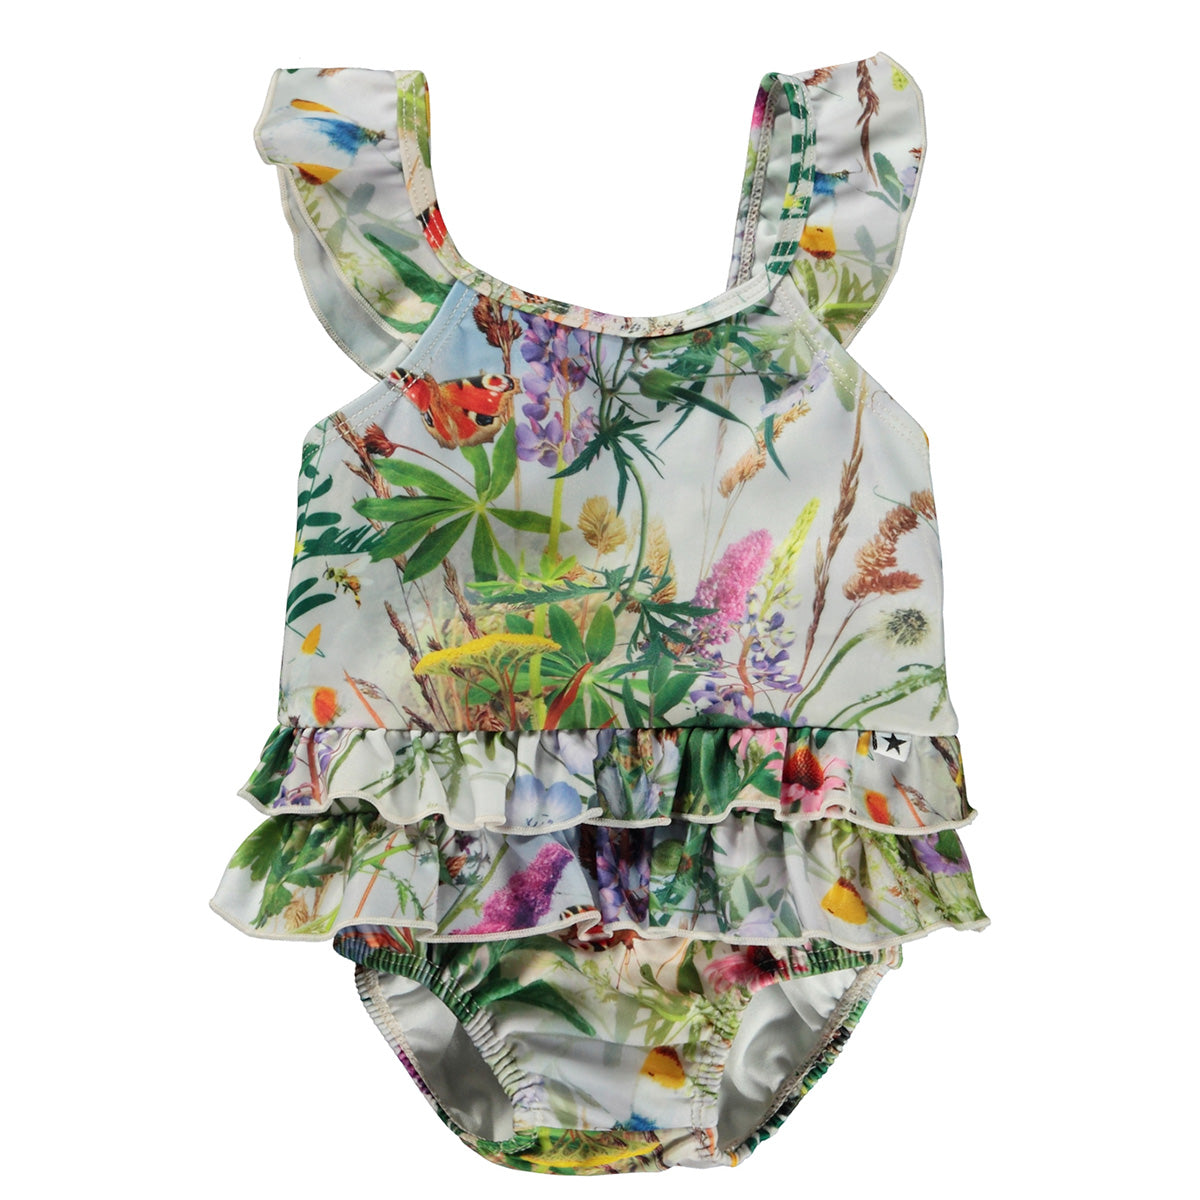 The Nalani Swimsuit from Molo. Baby swimsuit in an all over print of a beautiful frenzy of flowers with flapping butterflies